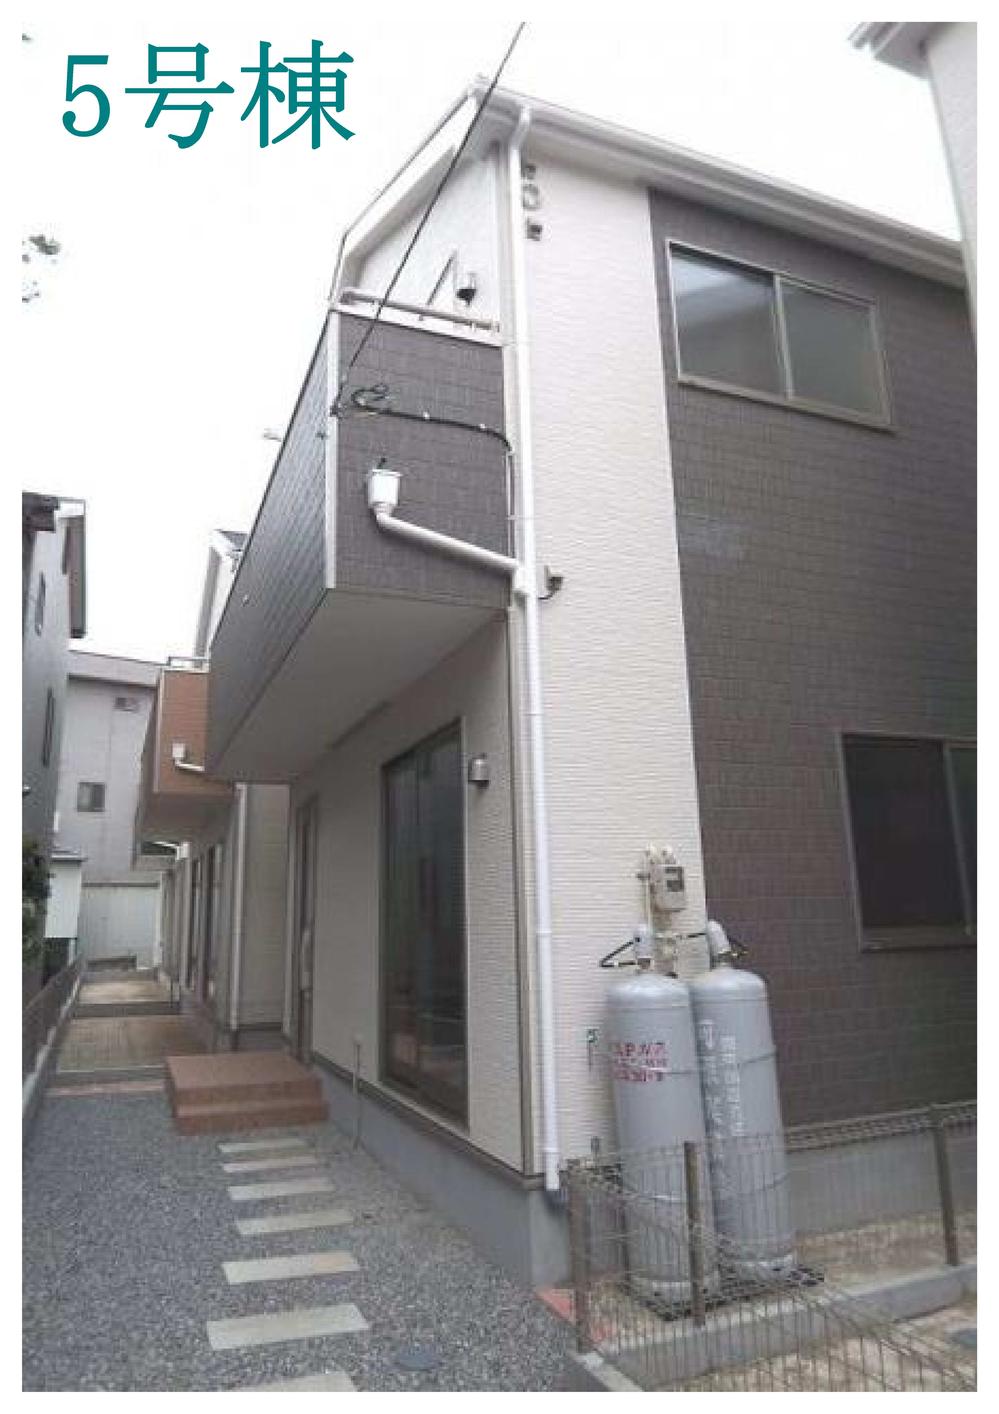 Local appearance photo. 5 Building Site 110 ・ 10 sq m  Independent kitchen Each room housed there